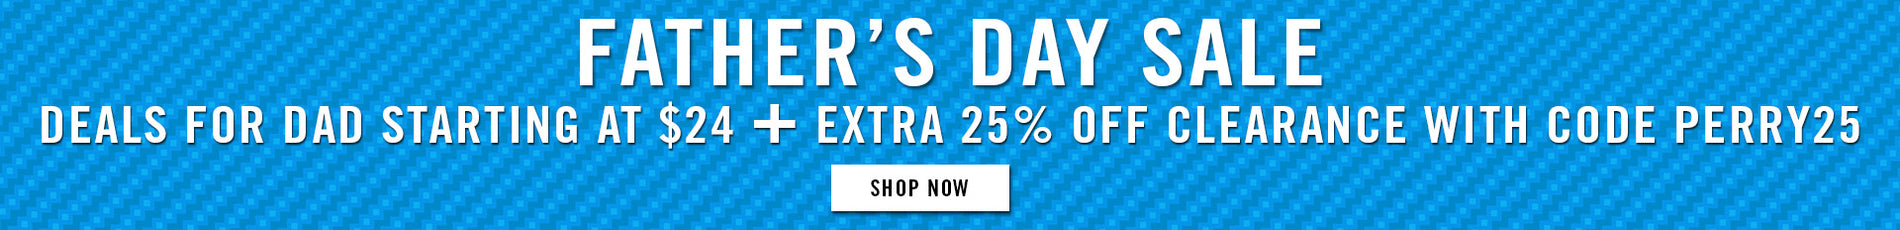 father's day sale sale - SHOP NOW